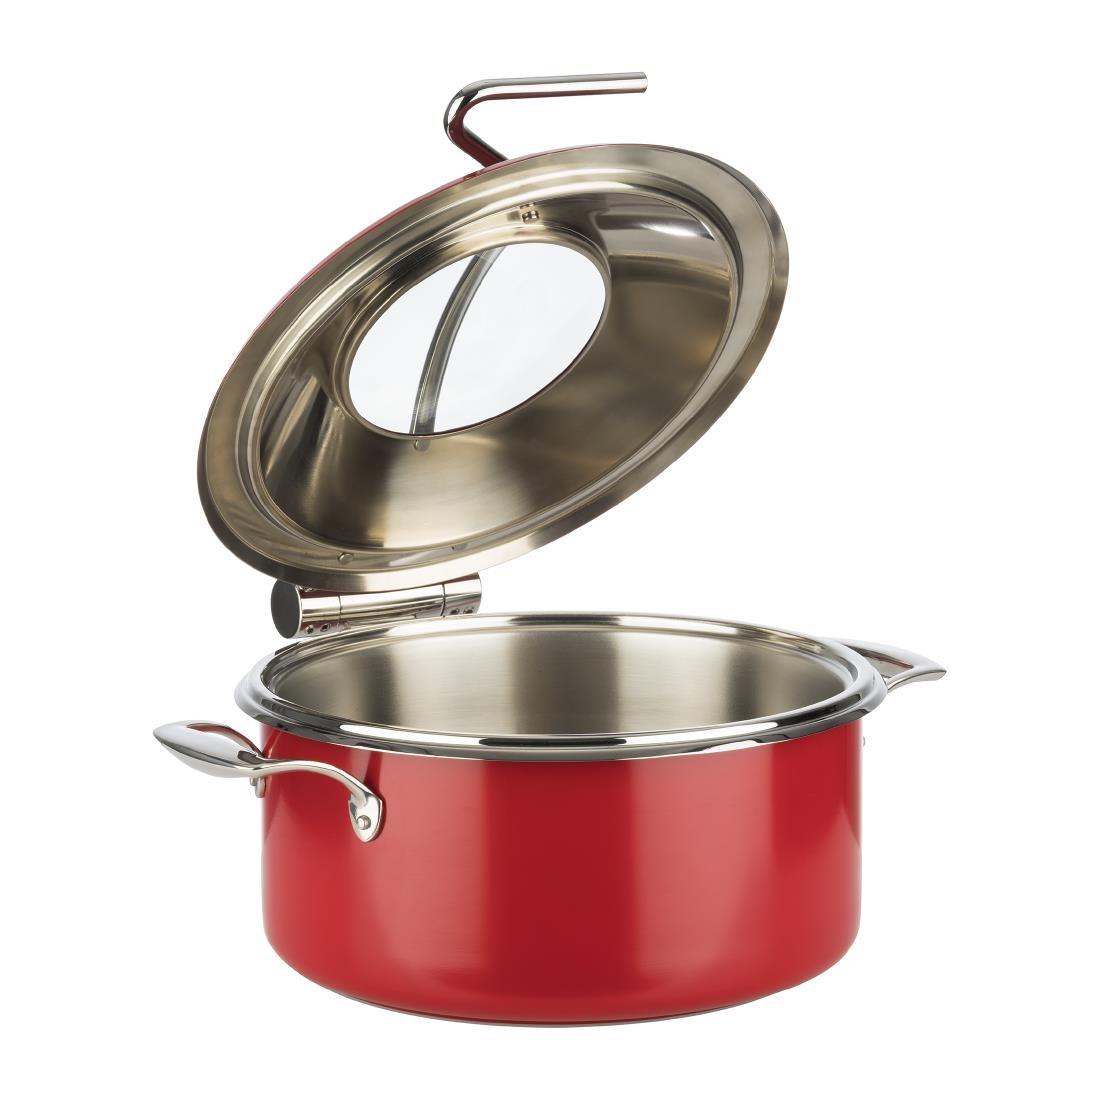 APS Chafing Dish Set Red 305mm - FT169  - 2